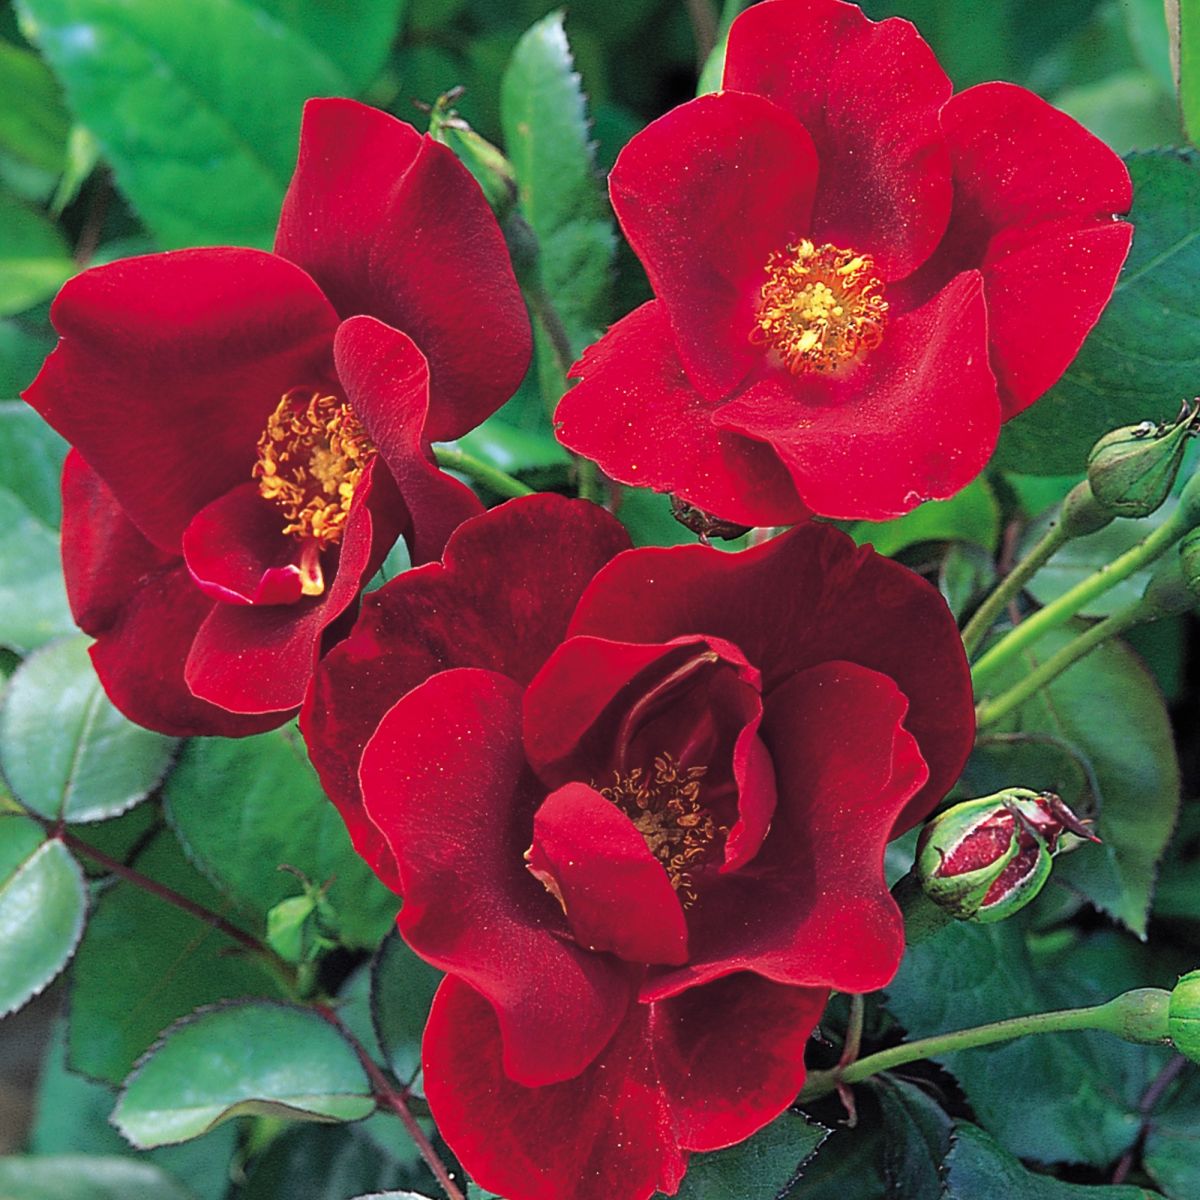 Along with decoration rose is also as well as beneficial for health